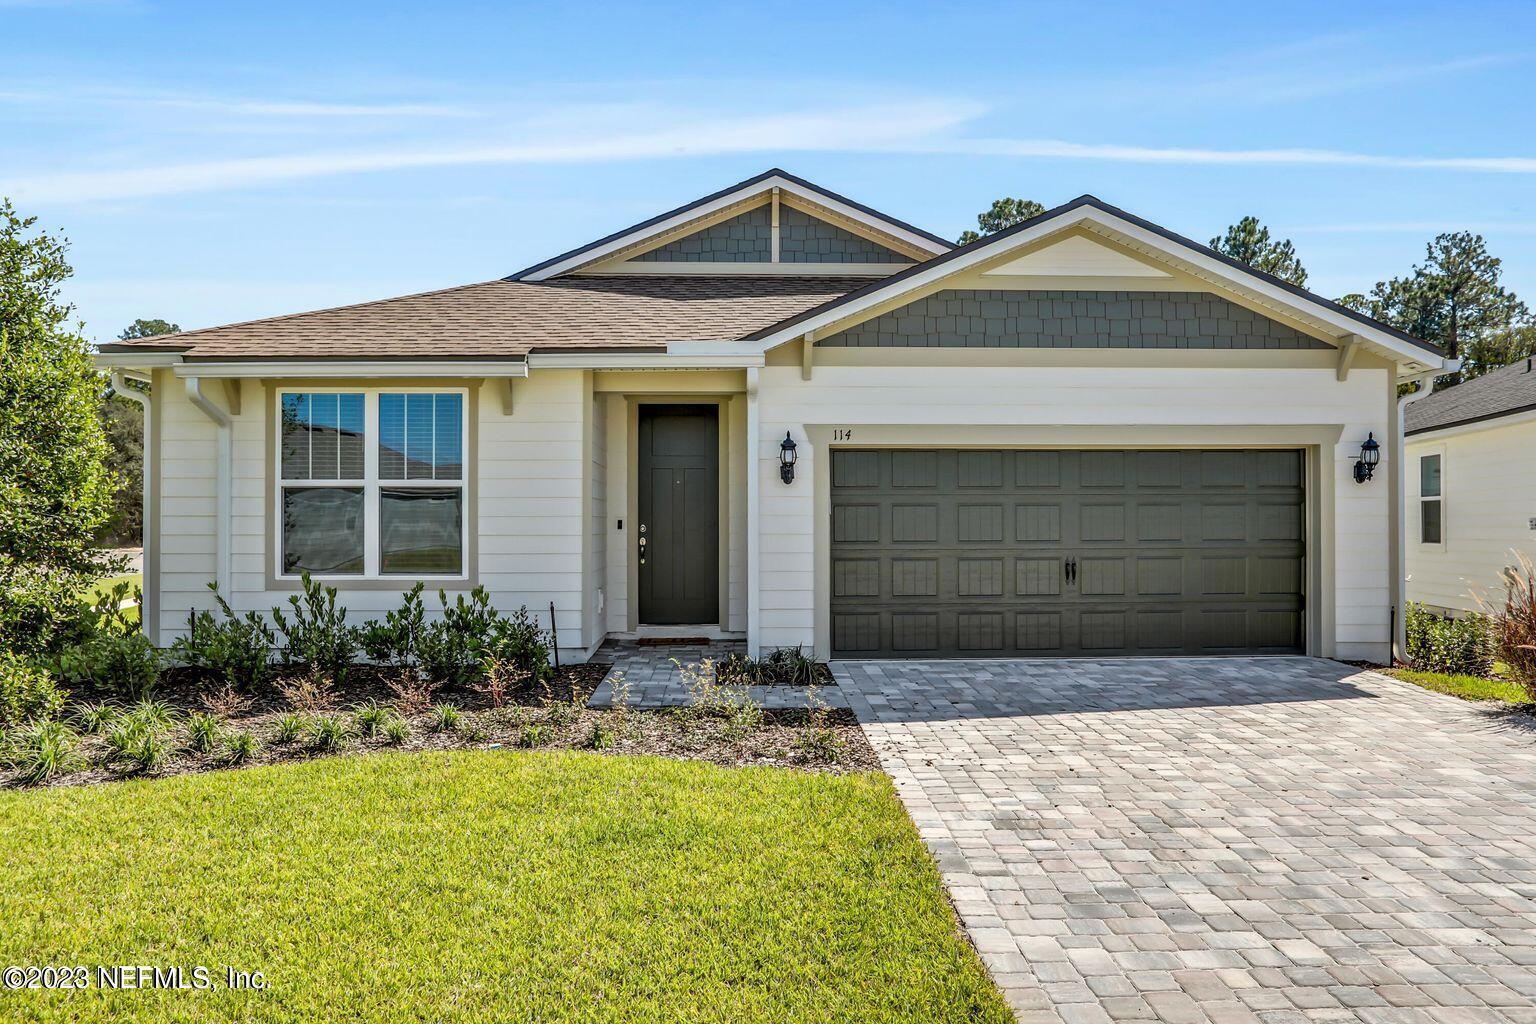 St Augustine, FL home for sale located at 114 Sundown Covey Trail, St Augustine, FL 32095